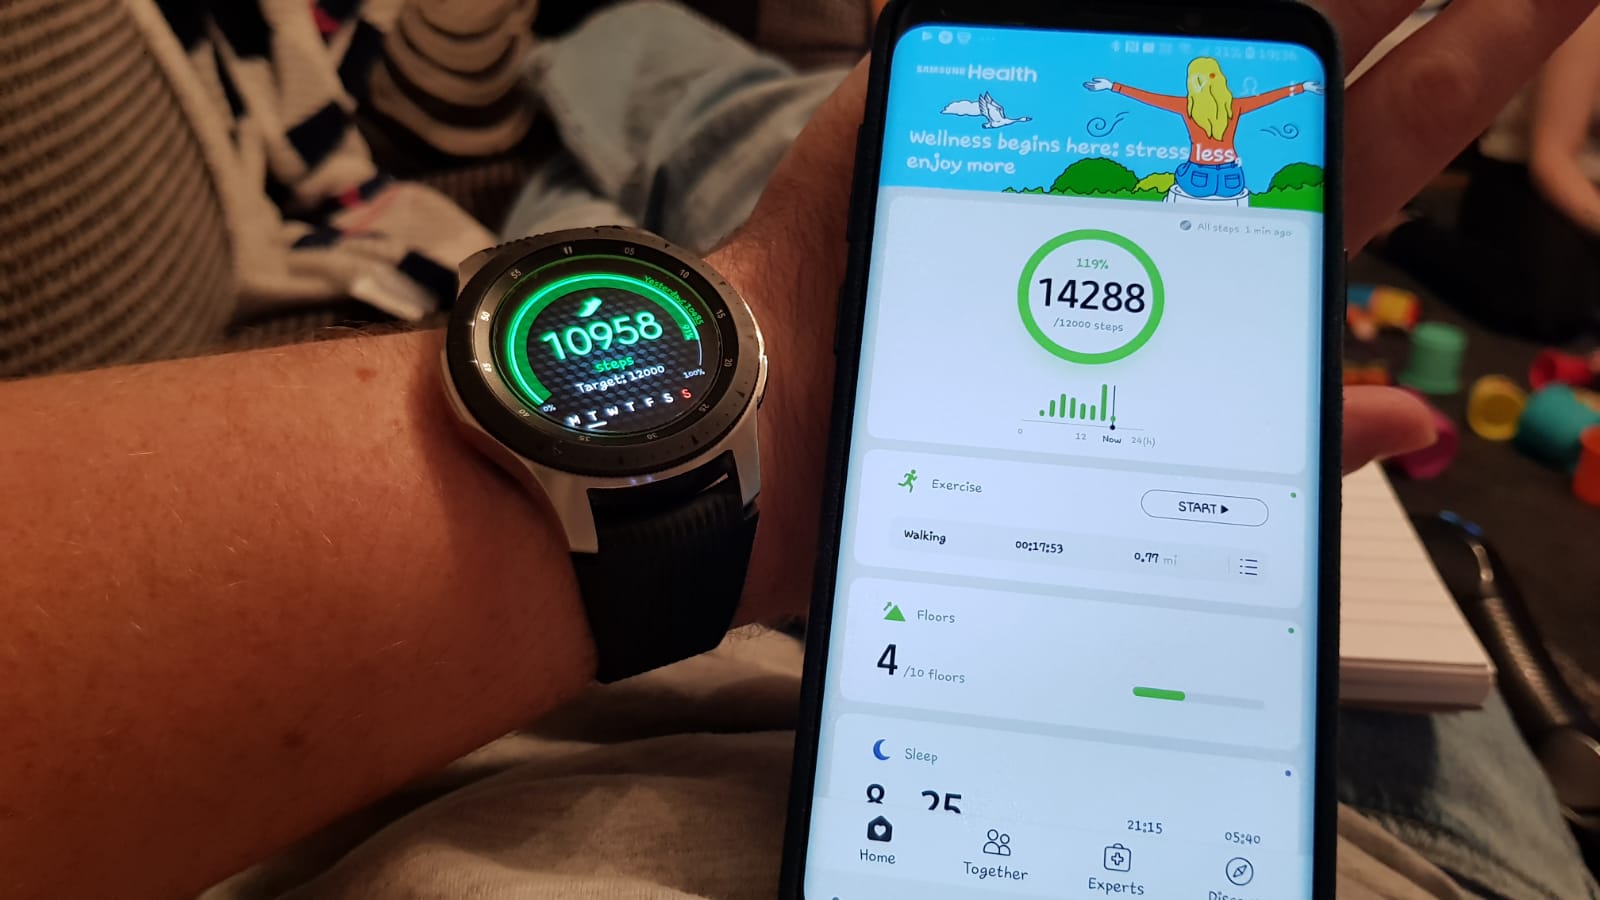 Galaxy Watch 46mm Not counting steps - Page 55 - Samsung Community